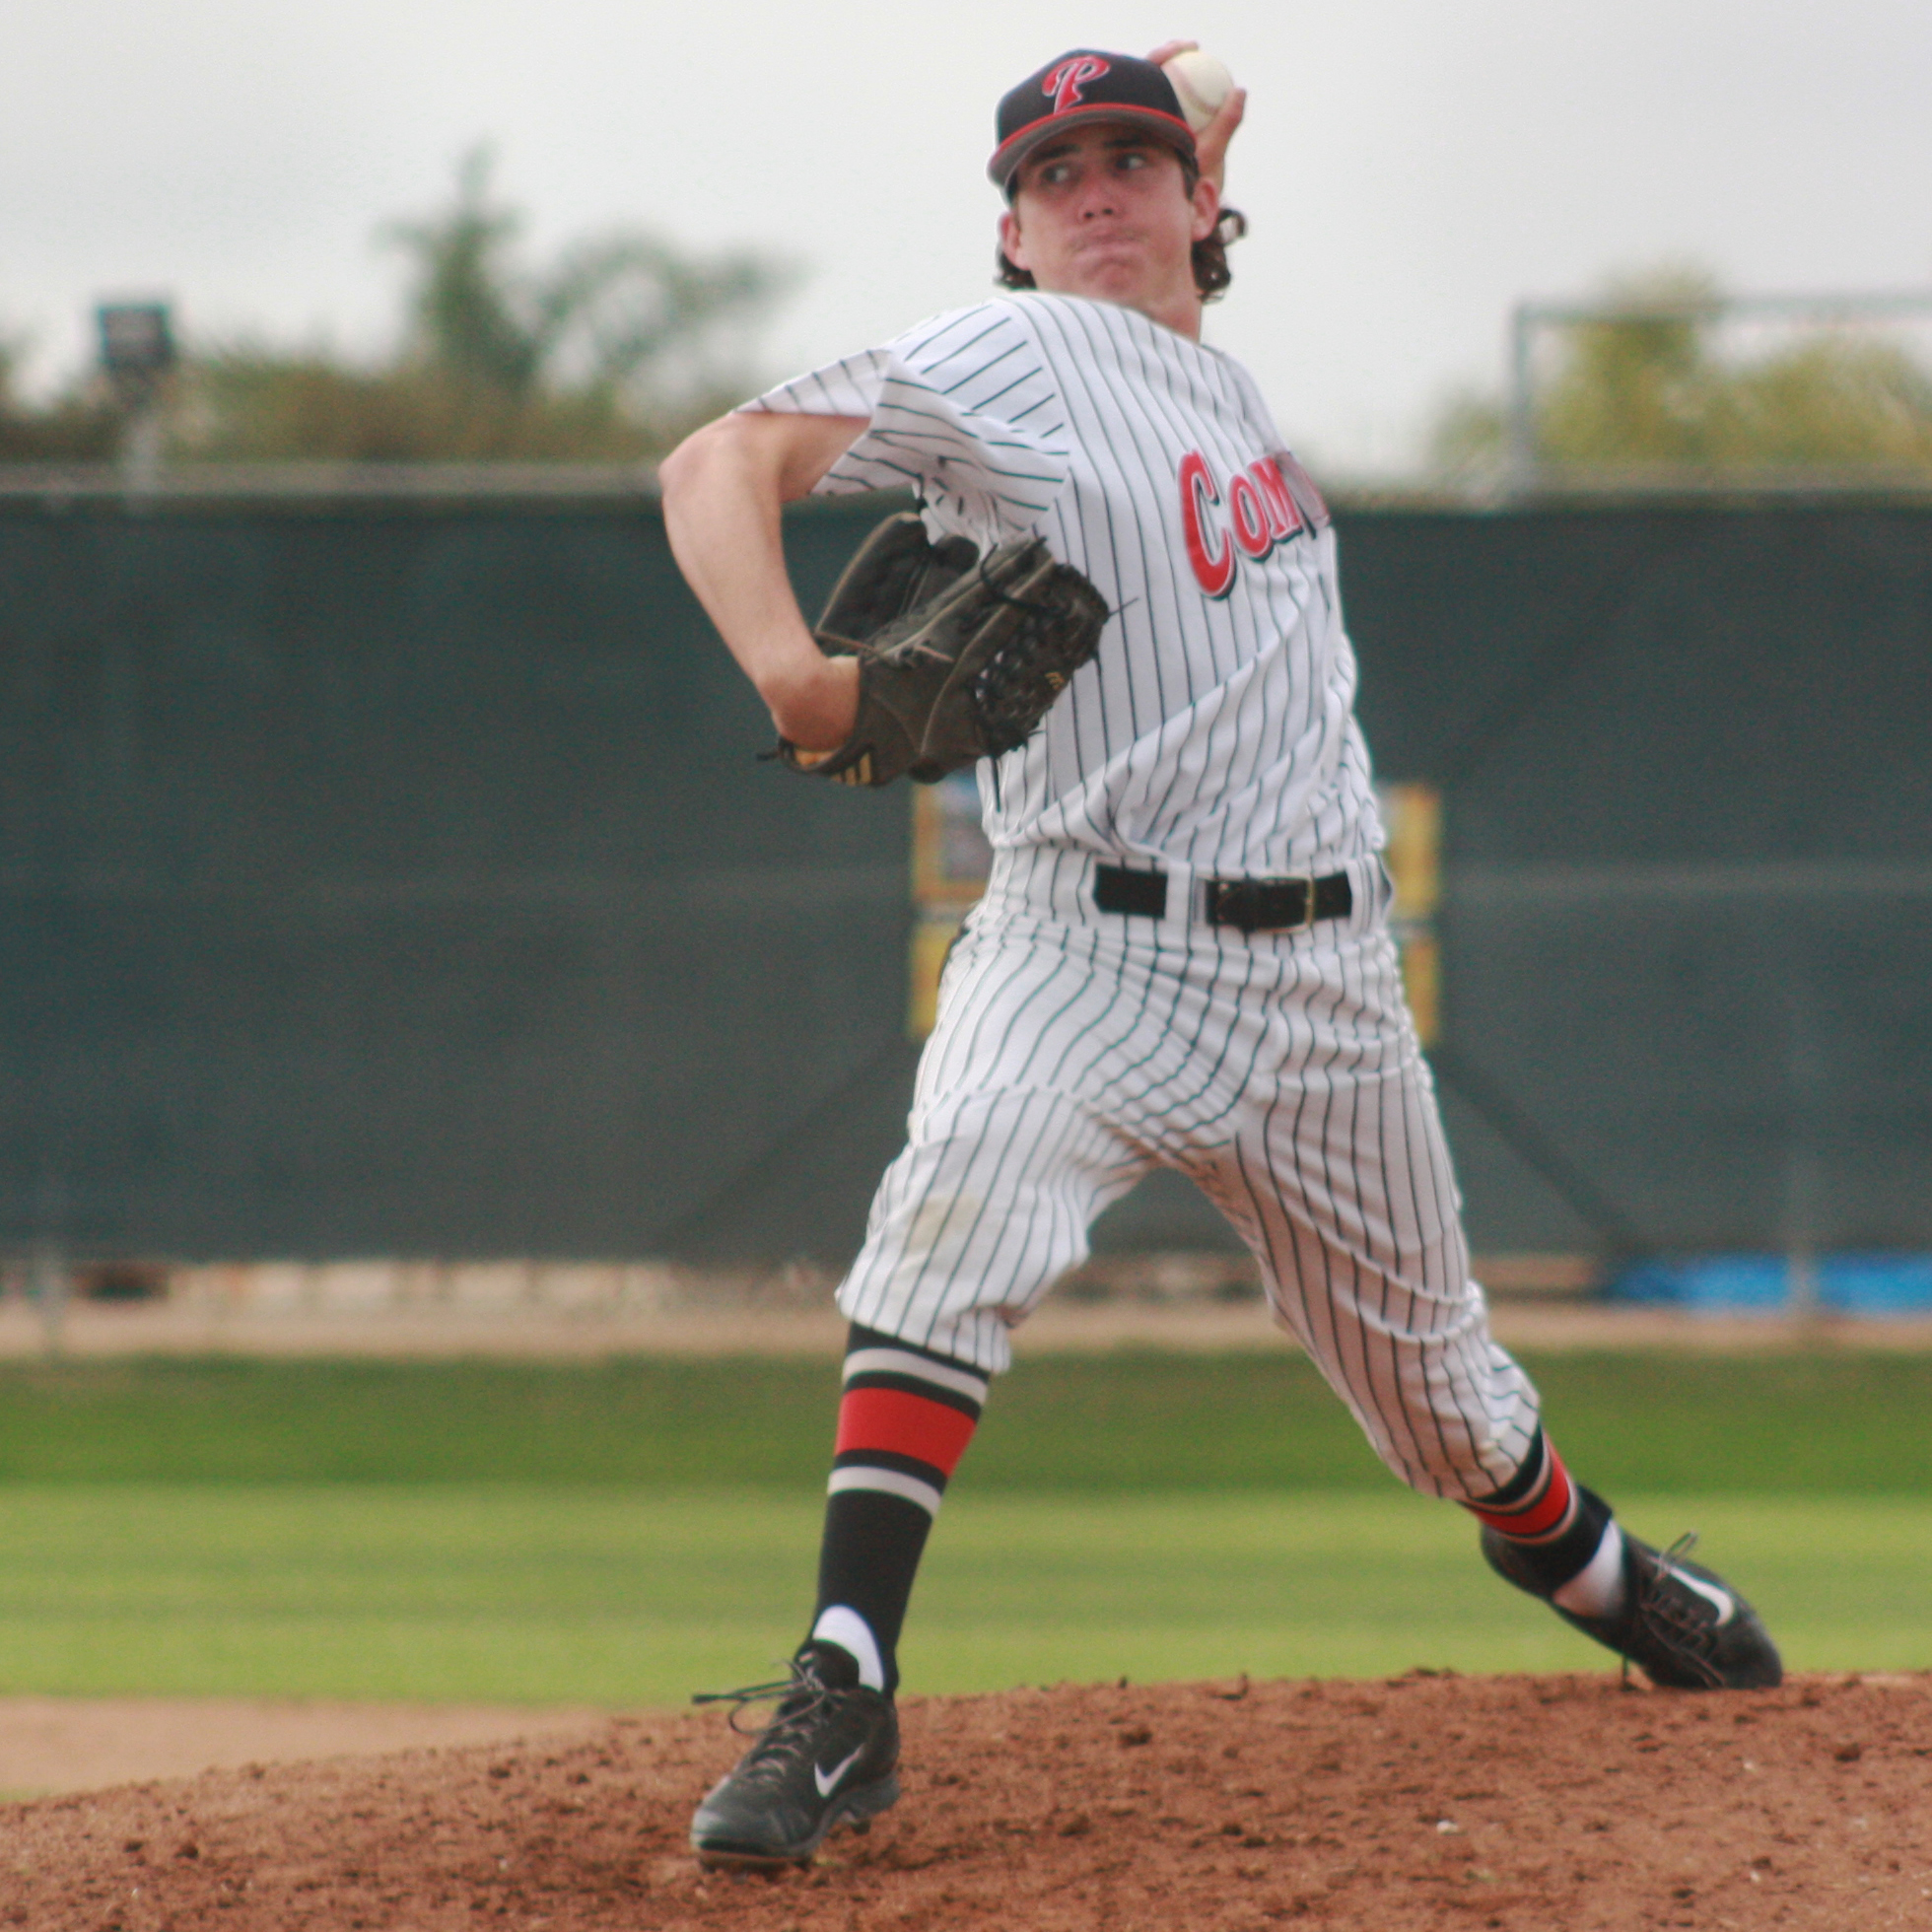 A male Palomar baseball player prepares to throw a baseball with his left hand, his left leg and foot extended behind him.